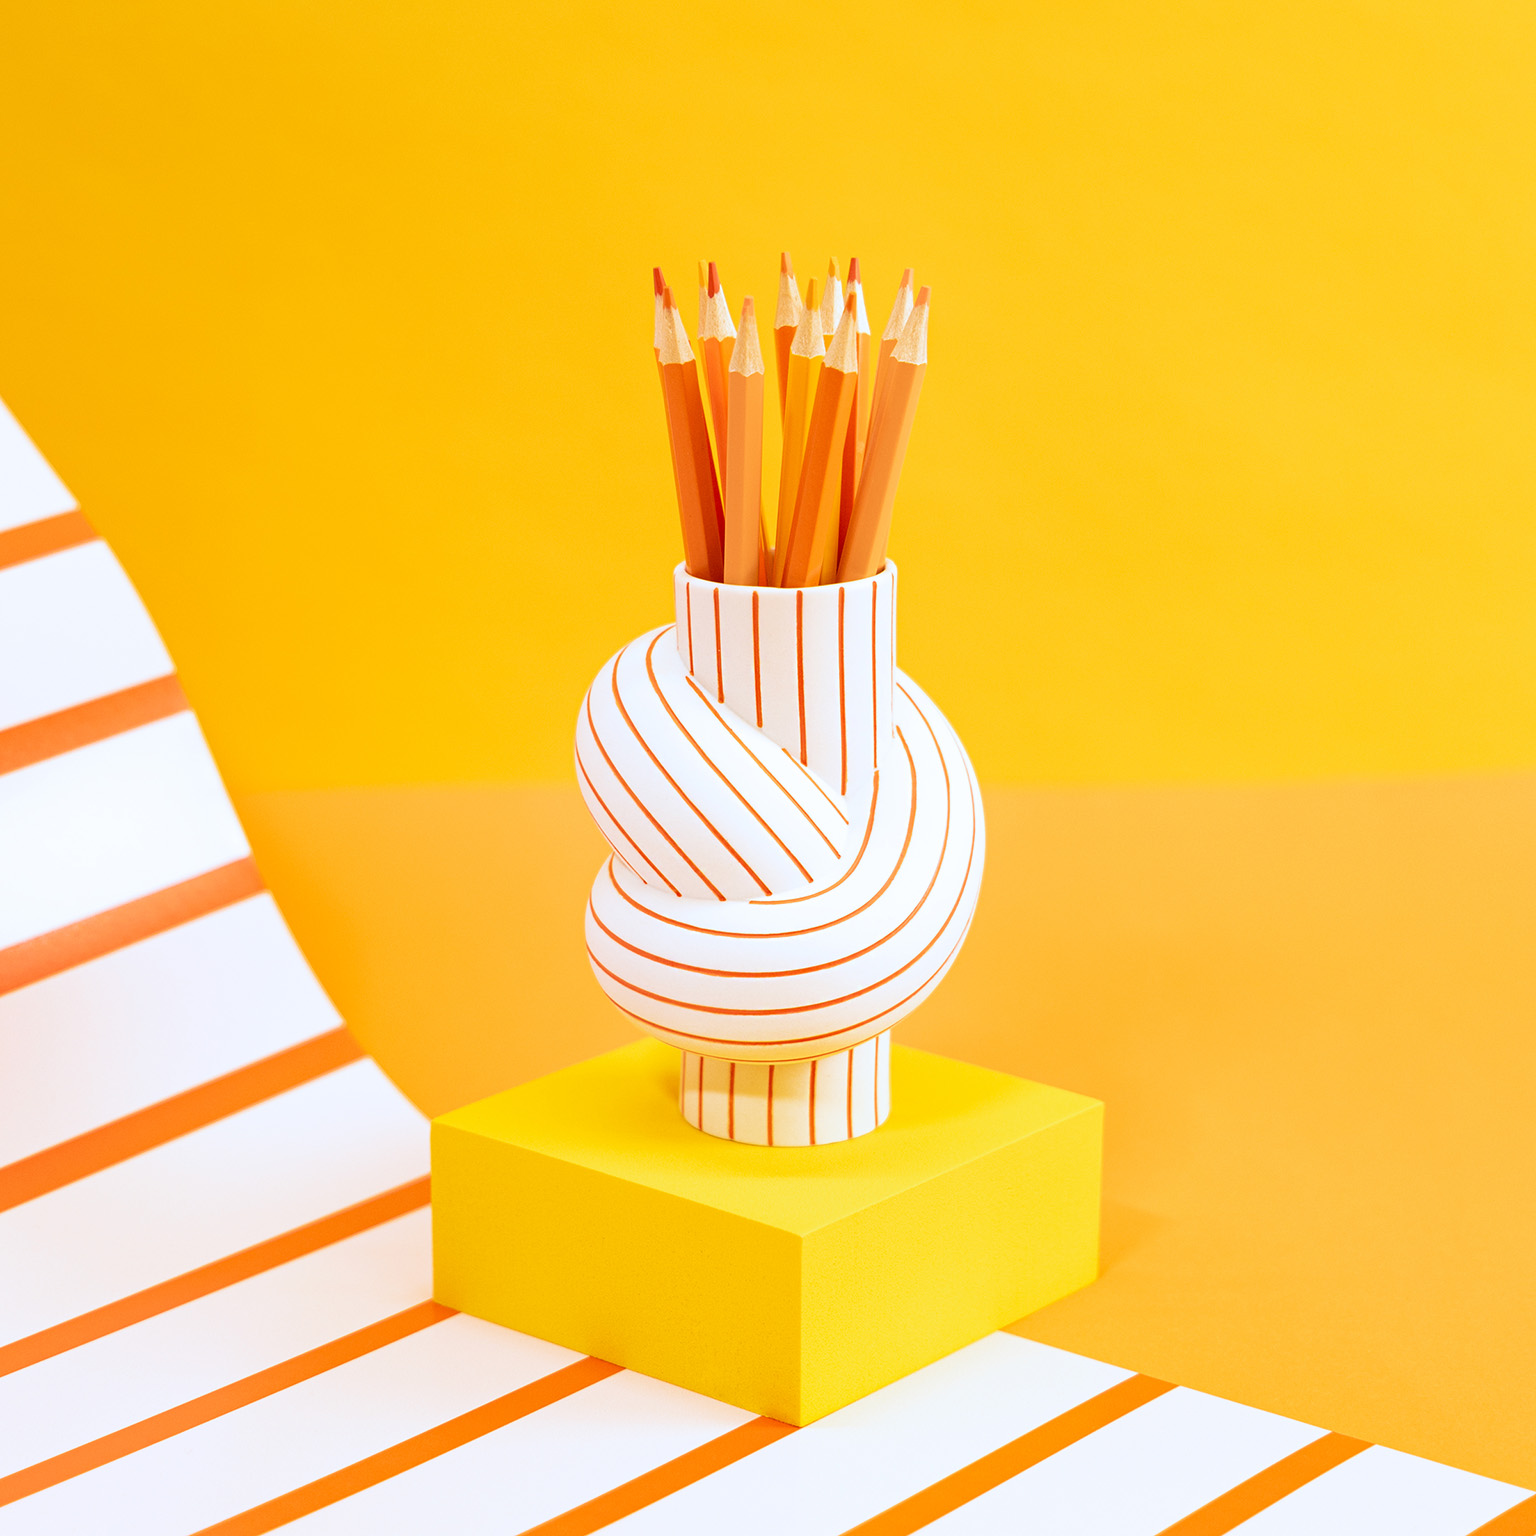 Nodes Stripes Mango filled with orange crayons against a yellow background with white and orange stripes.